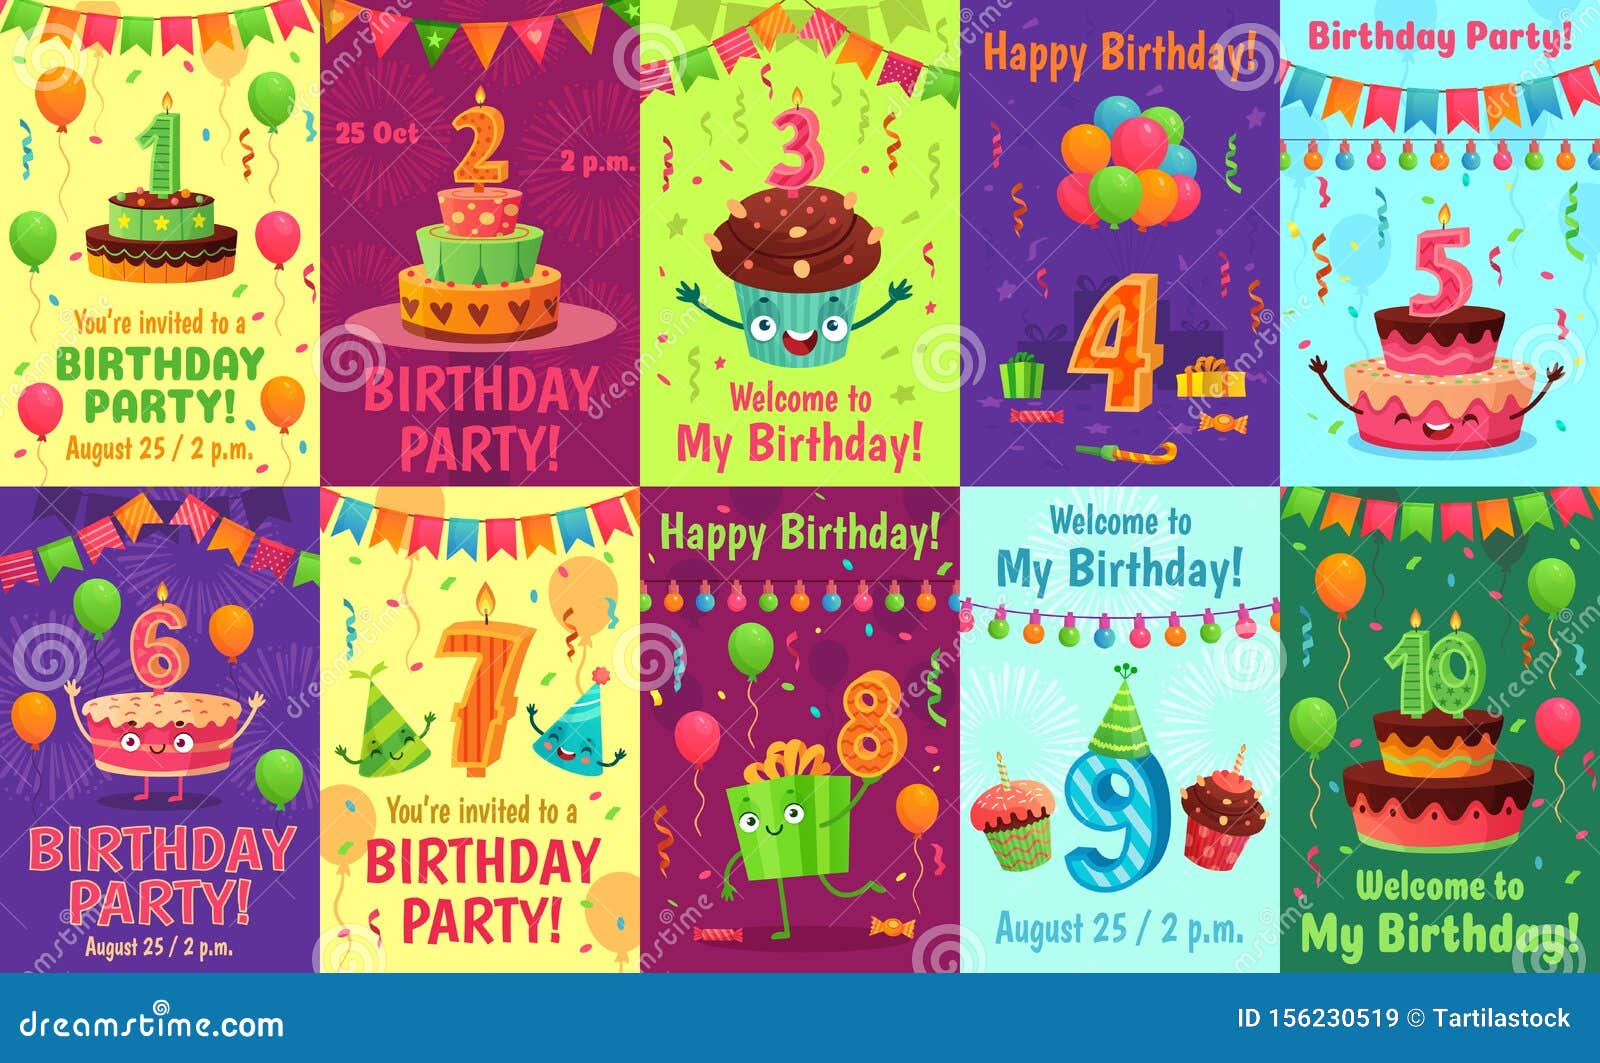 Cartoon Anniversary Greeting Card. Birthday Numbers, Celebration Invitation  and Party Cake Number Candles Poster Vector Stock Vector - Illustration of  celebration, packaging: 156230519